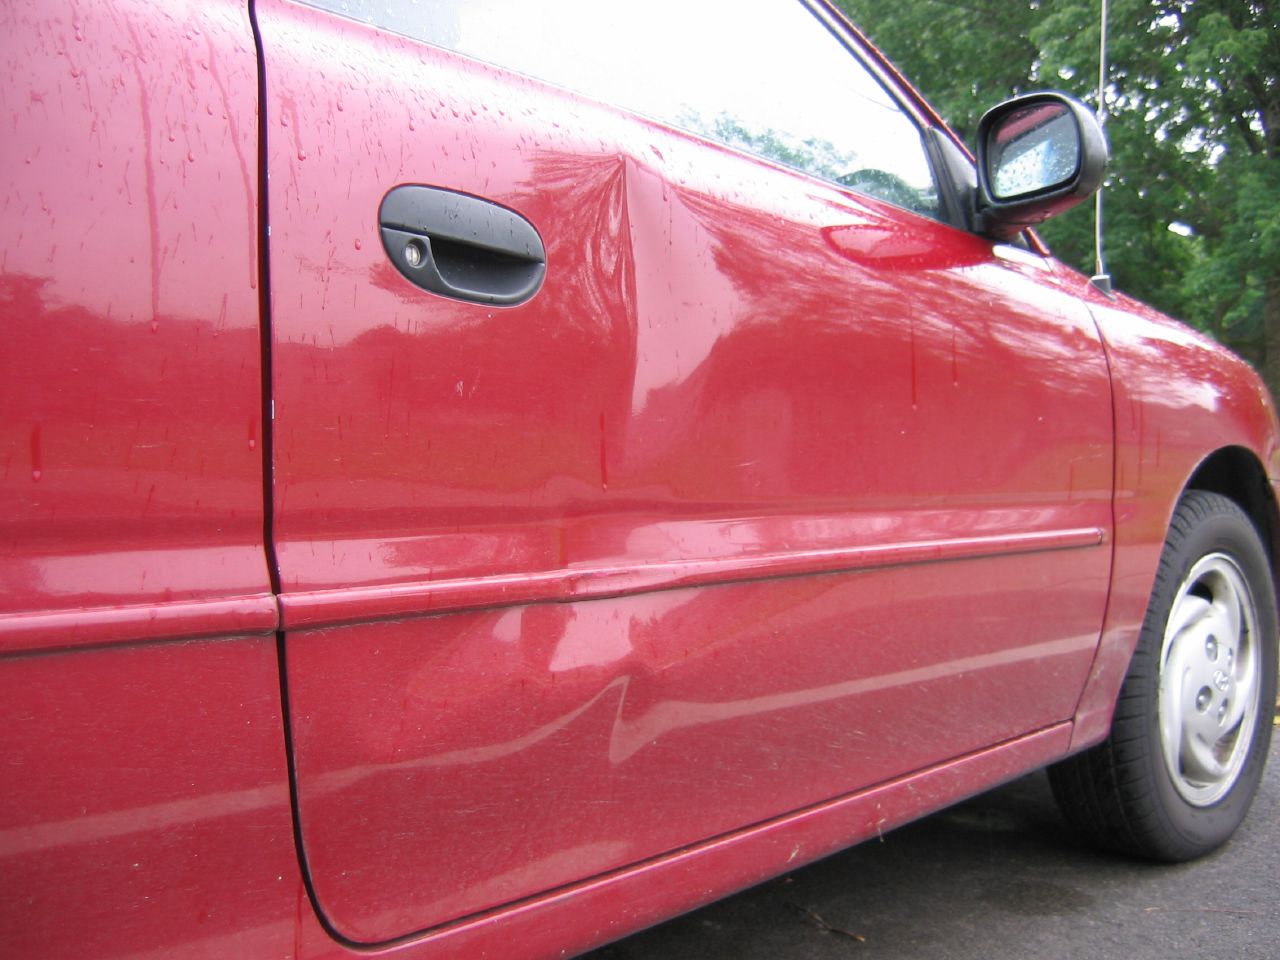 Video reveals one clever way to fix a dent in your car